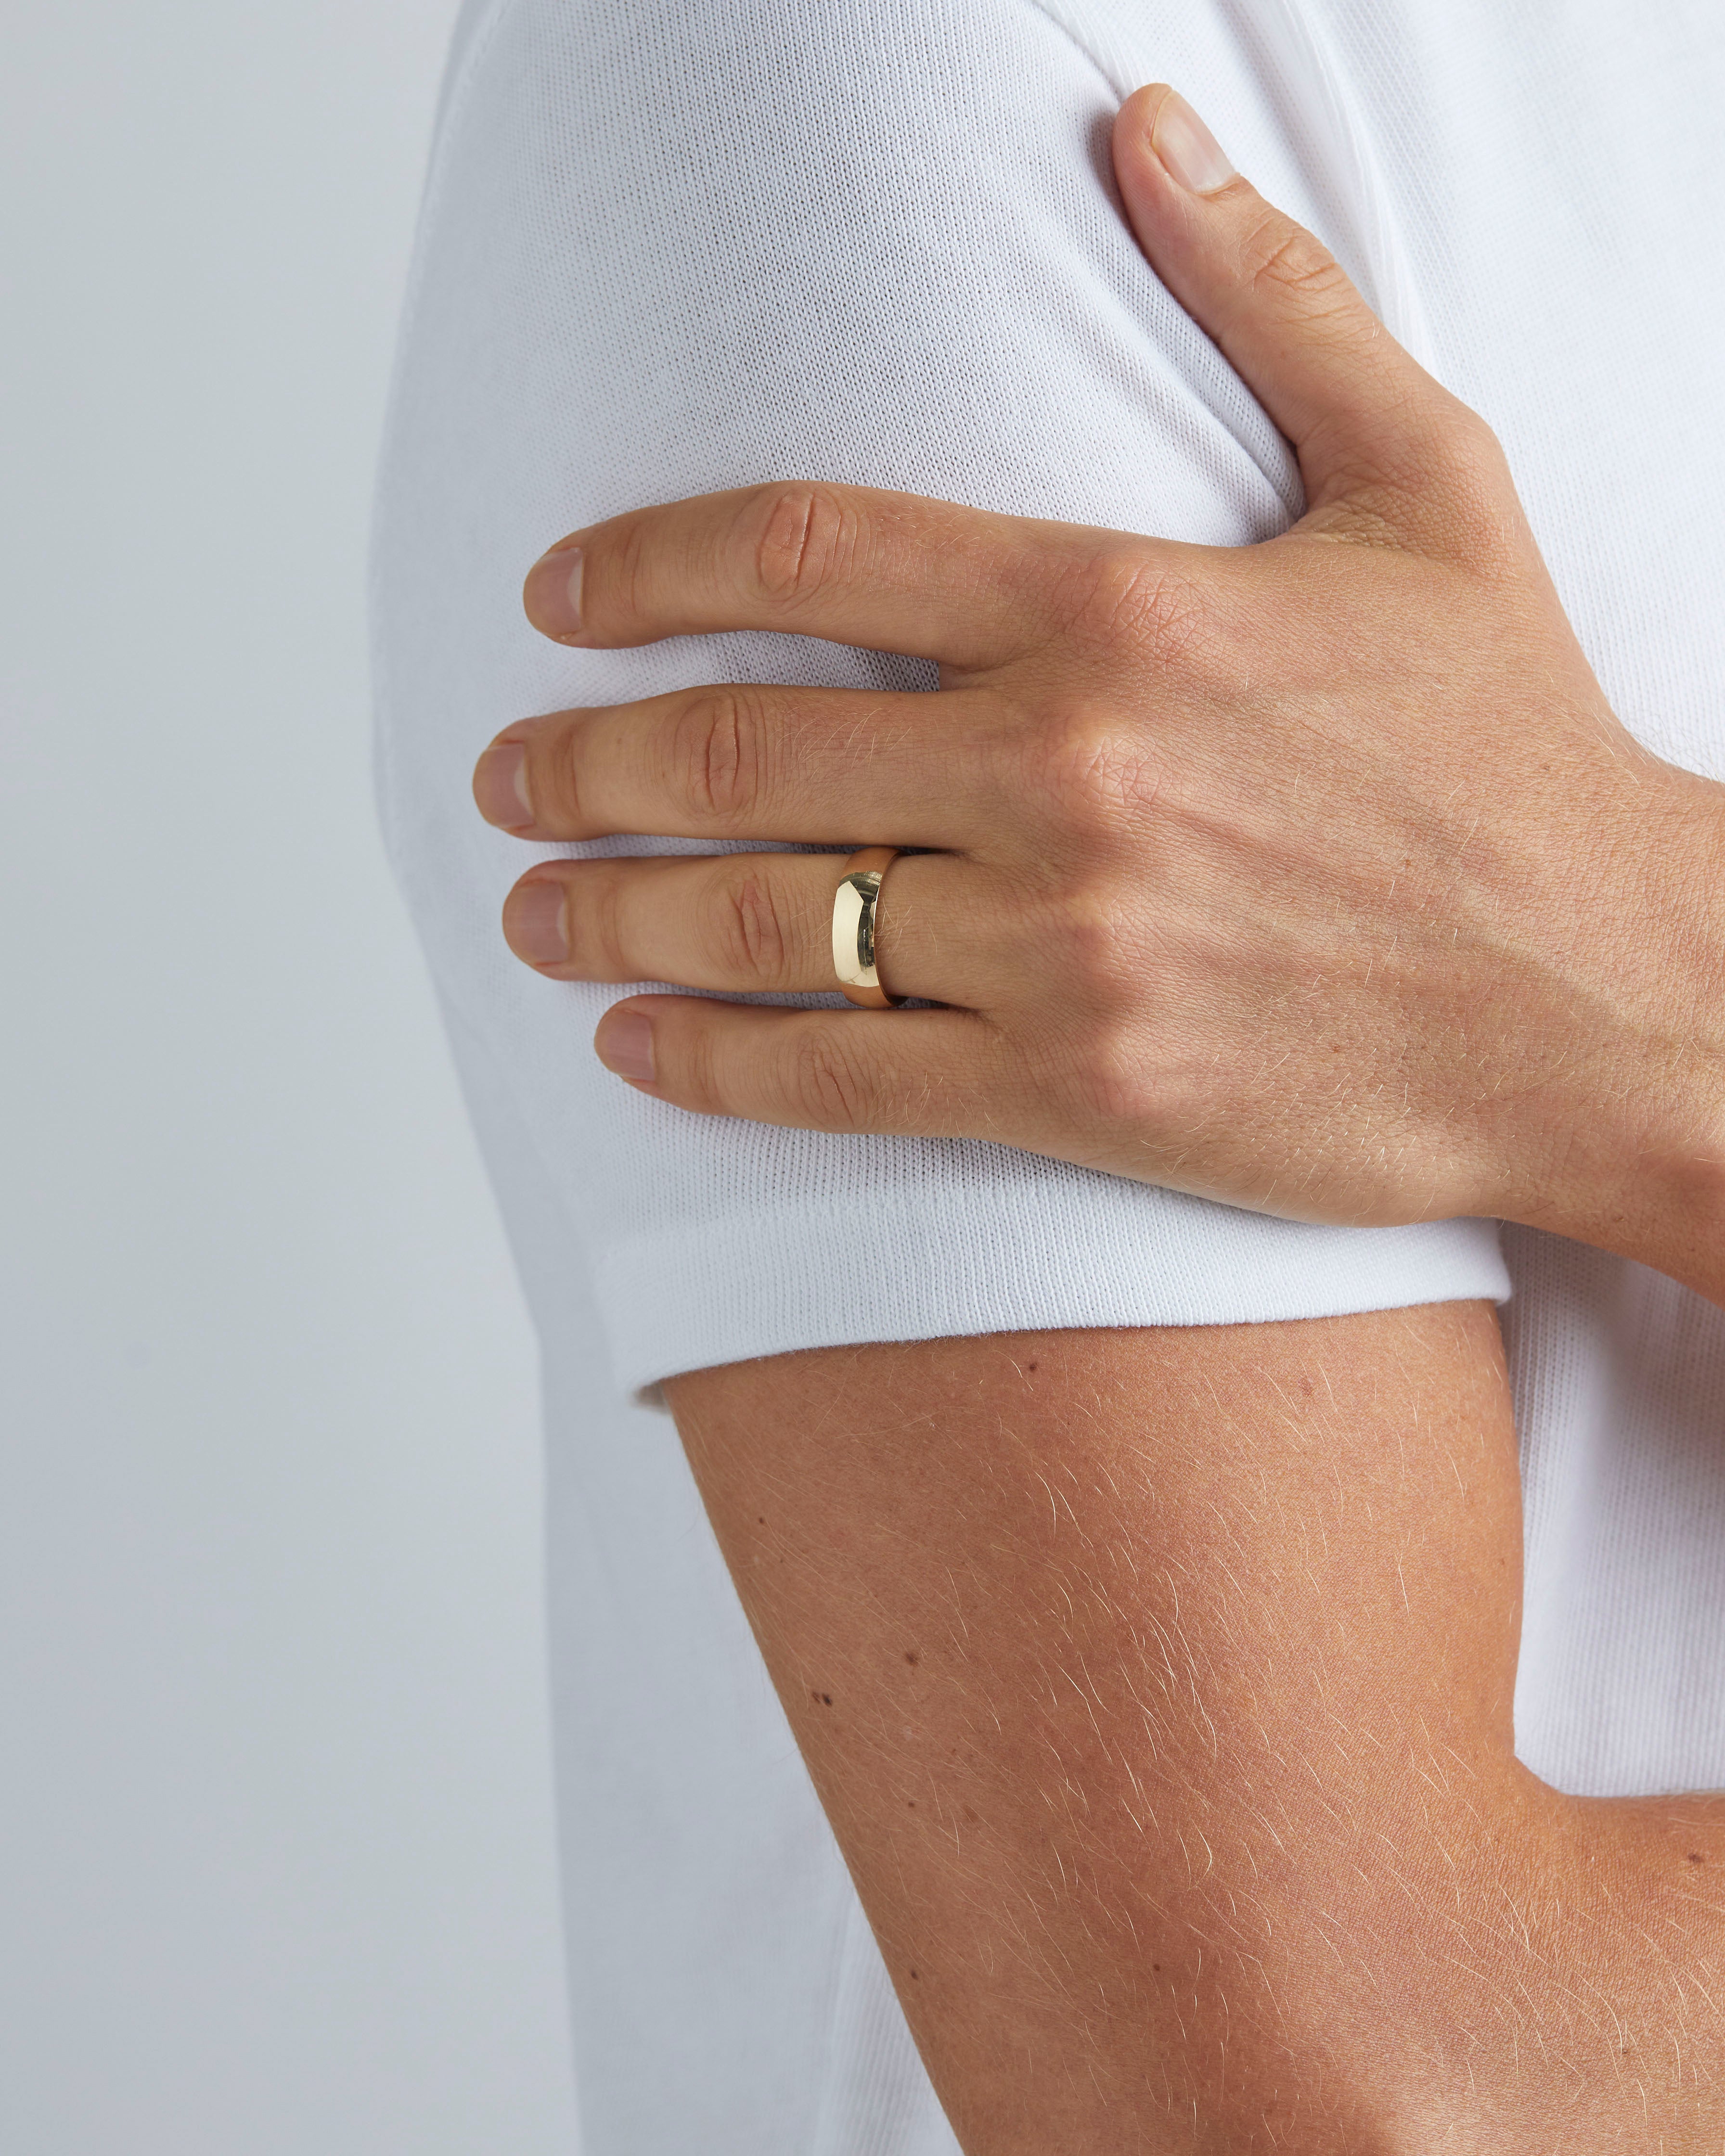 A model wears our 6mm classic heavy wedding ring in yellow gold